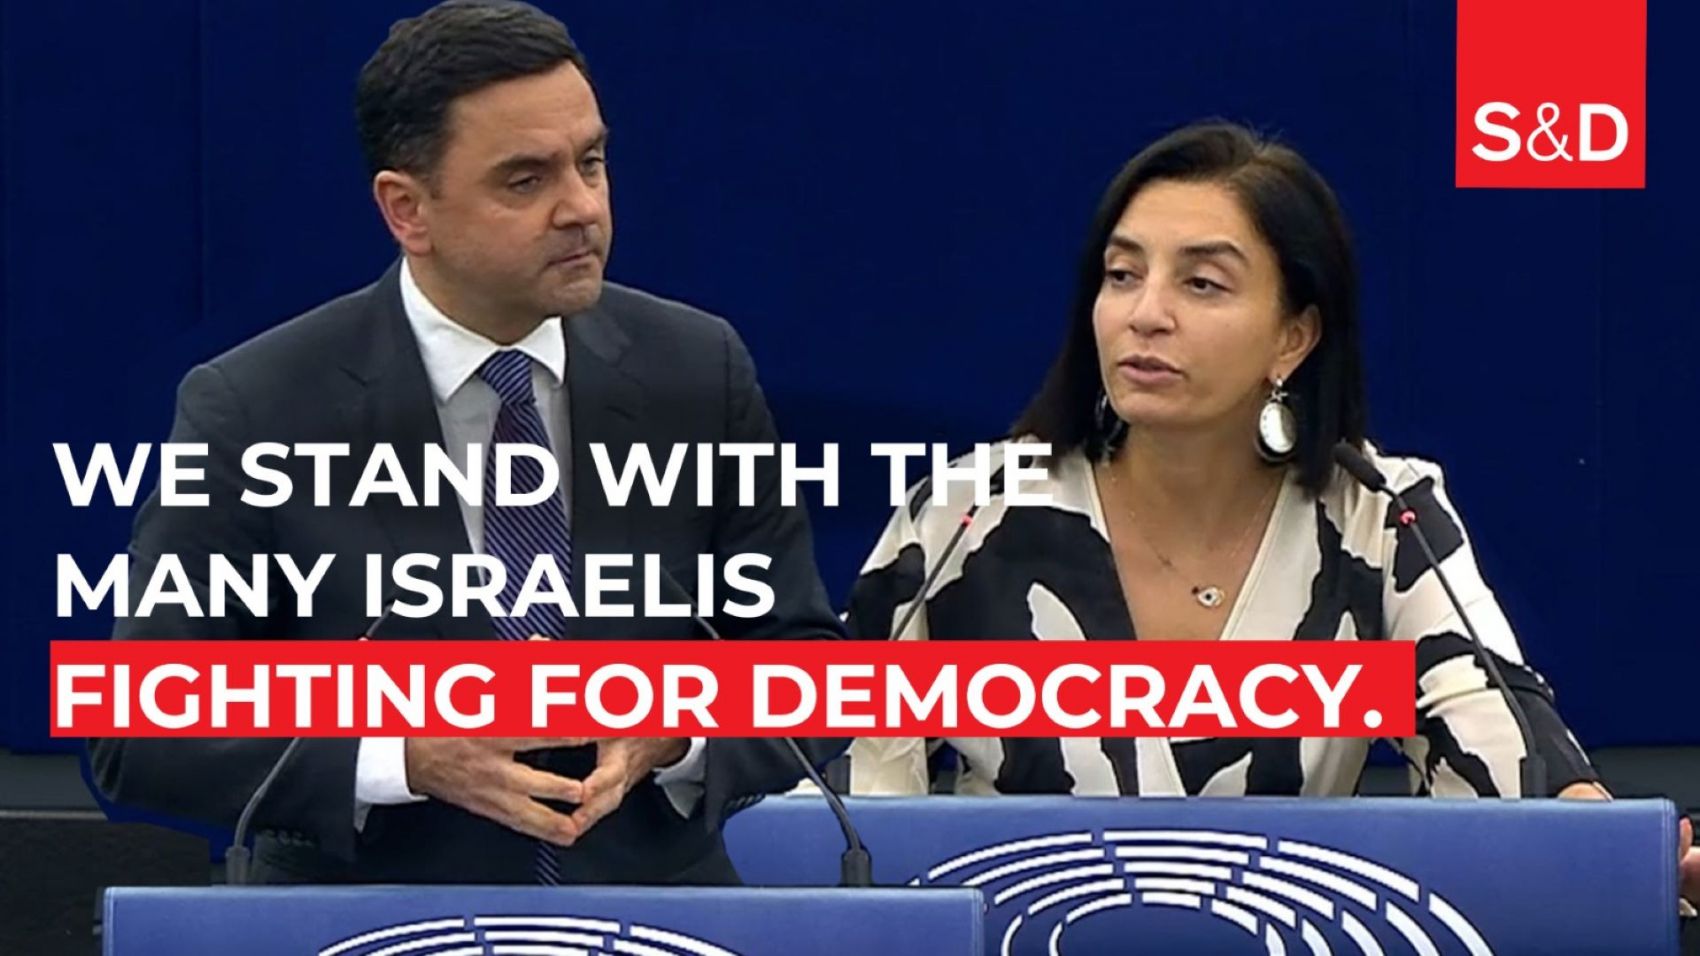 We stand with the many Israelis fighting for democracy